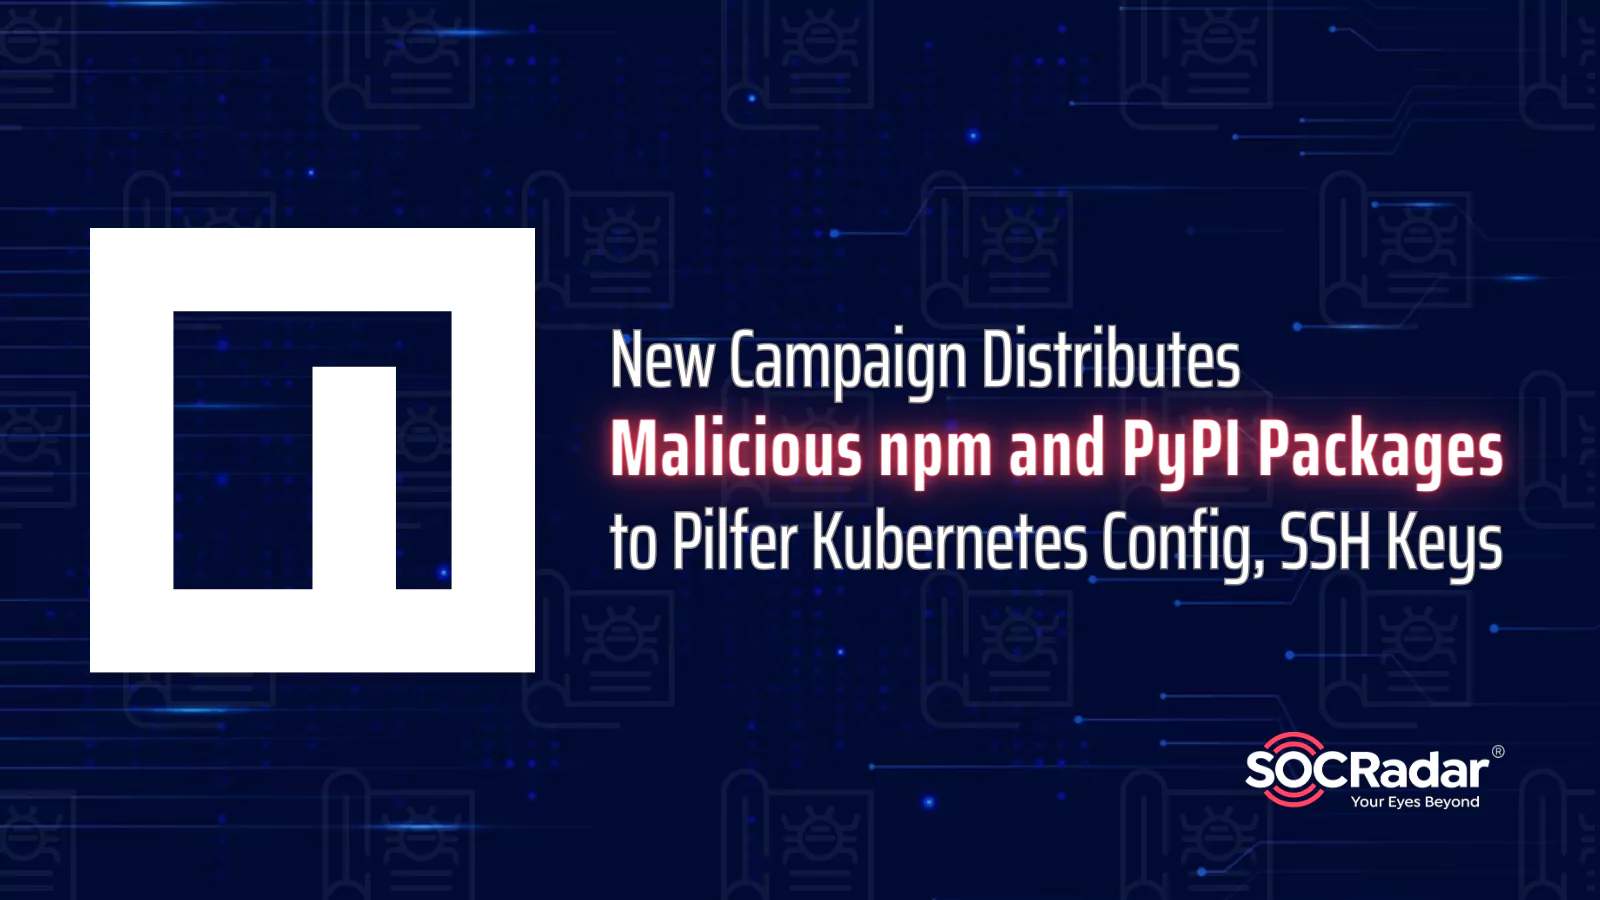 SOCRadar® Cyber Intelligence Inc. | New Campaign Distributes Malicious npm and PyPI Packages to Pilfer Kubernetes Config, SSH Keys